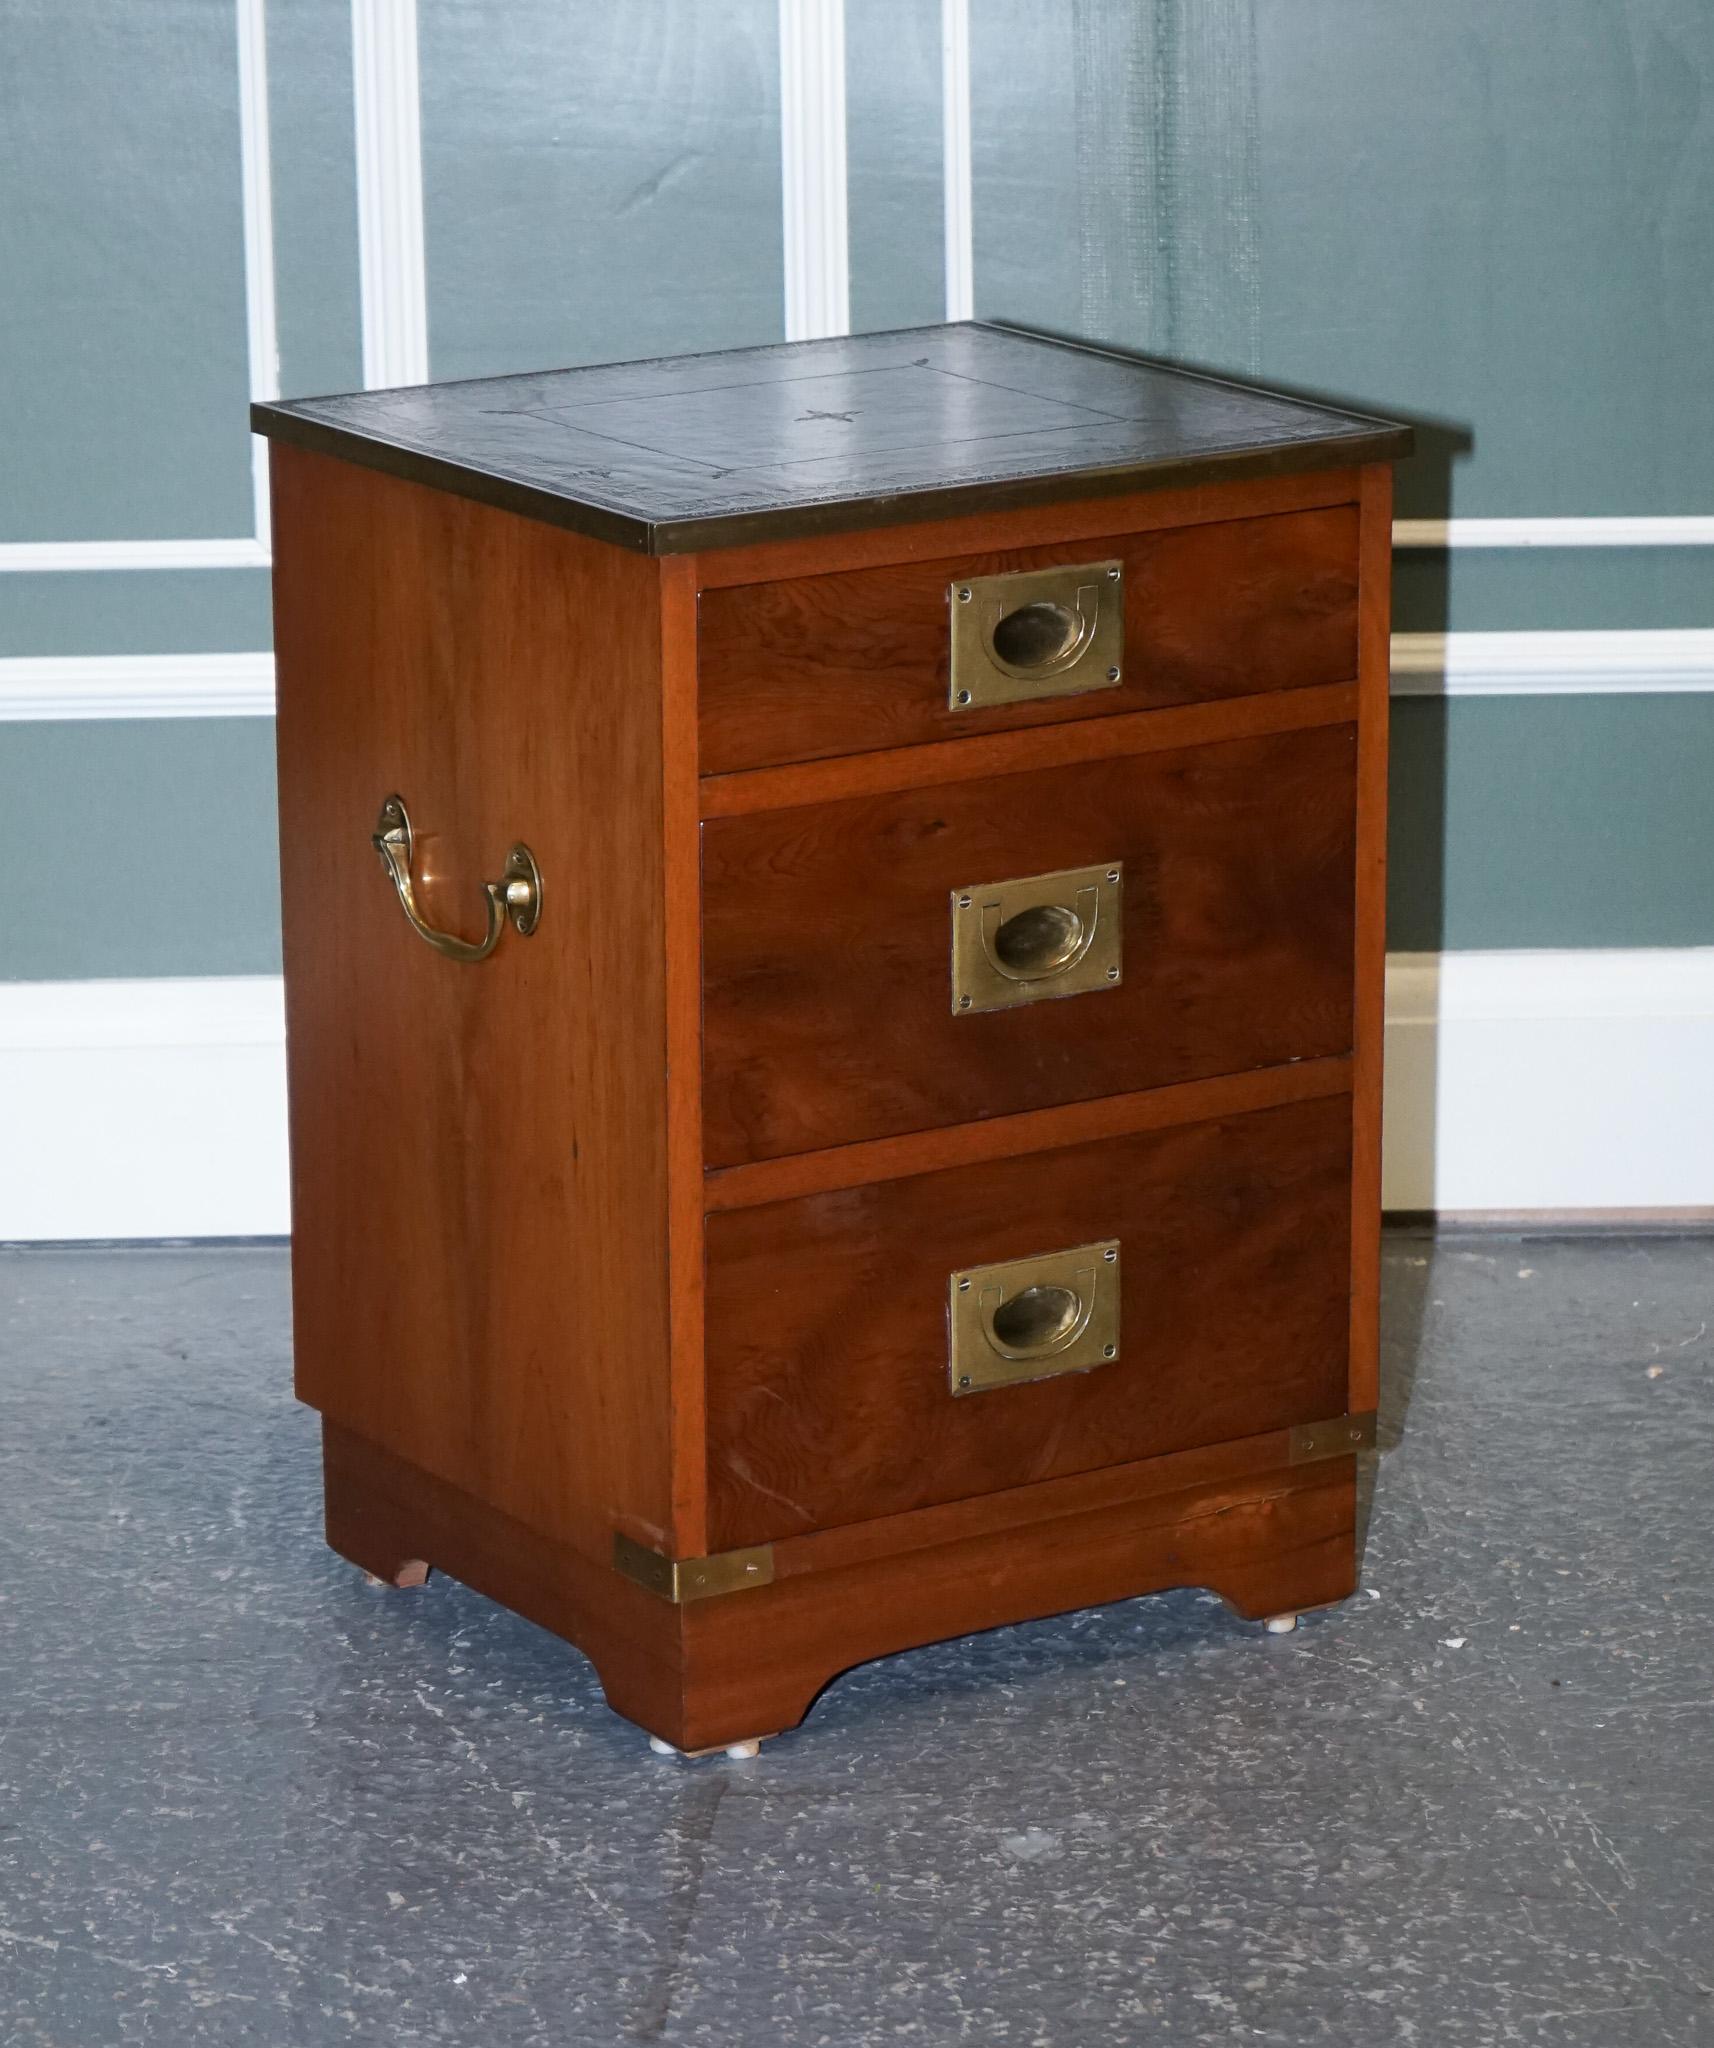 We are excited to offer for sale this military campaign bedside nightstand end table.

It has brass fittings and traditional brass handles.
The top is inlaid with the original green leather which has some patina on it.
It serves three drawers